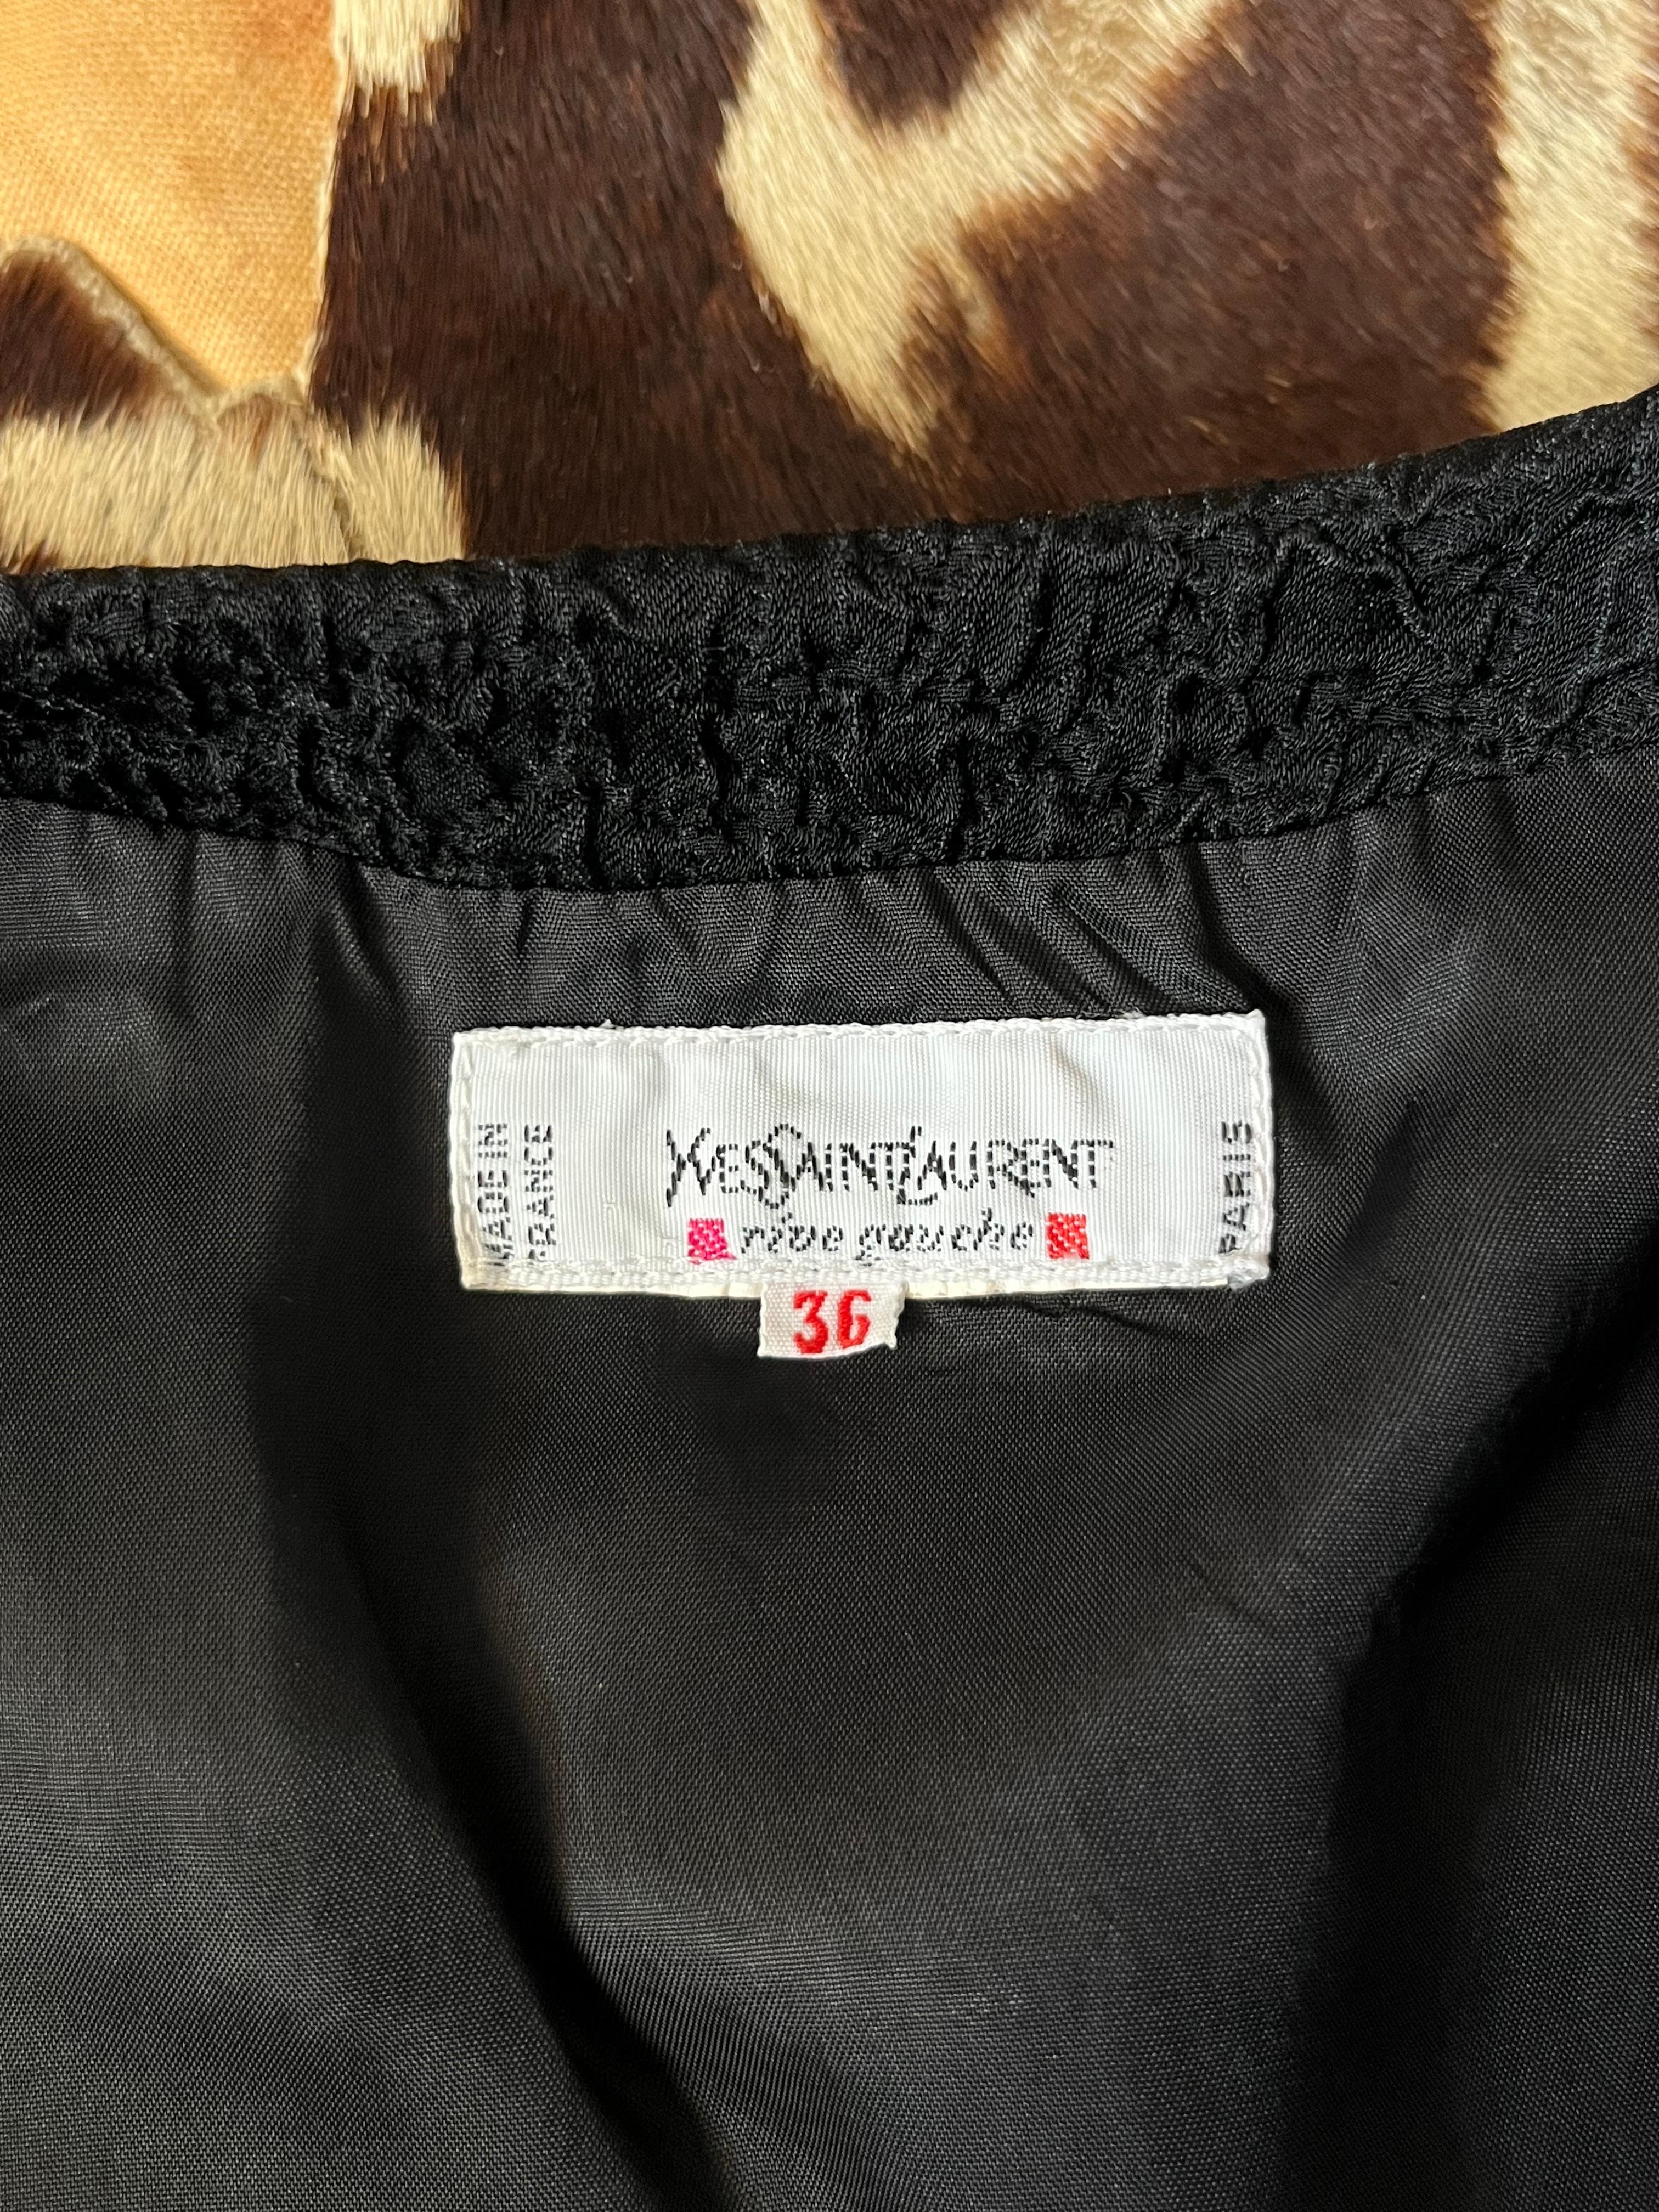 black pants ysl suit with gold buttons For Sale 11